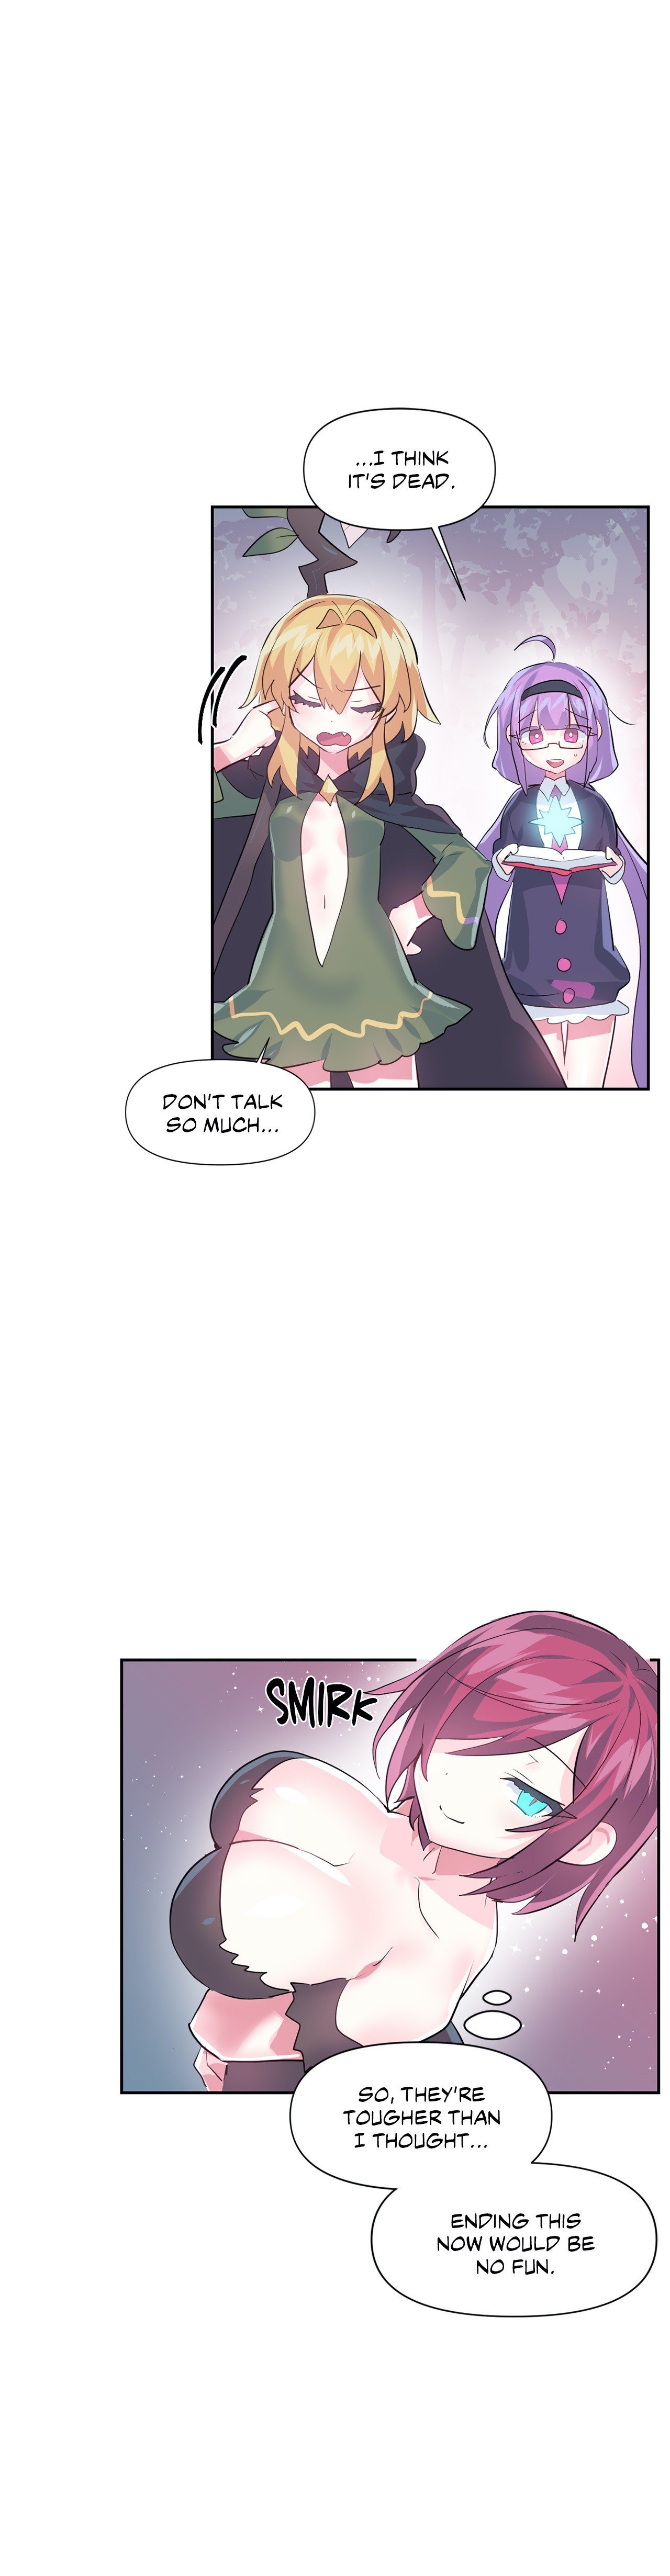 log-in-to-lust-a-land-chap-39-8